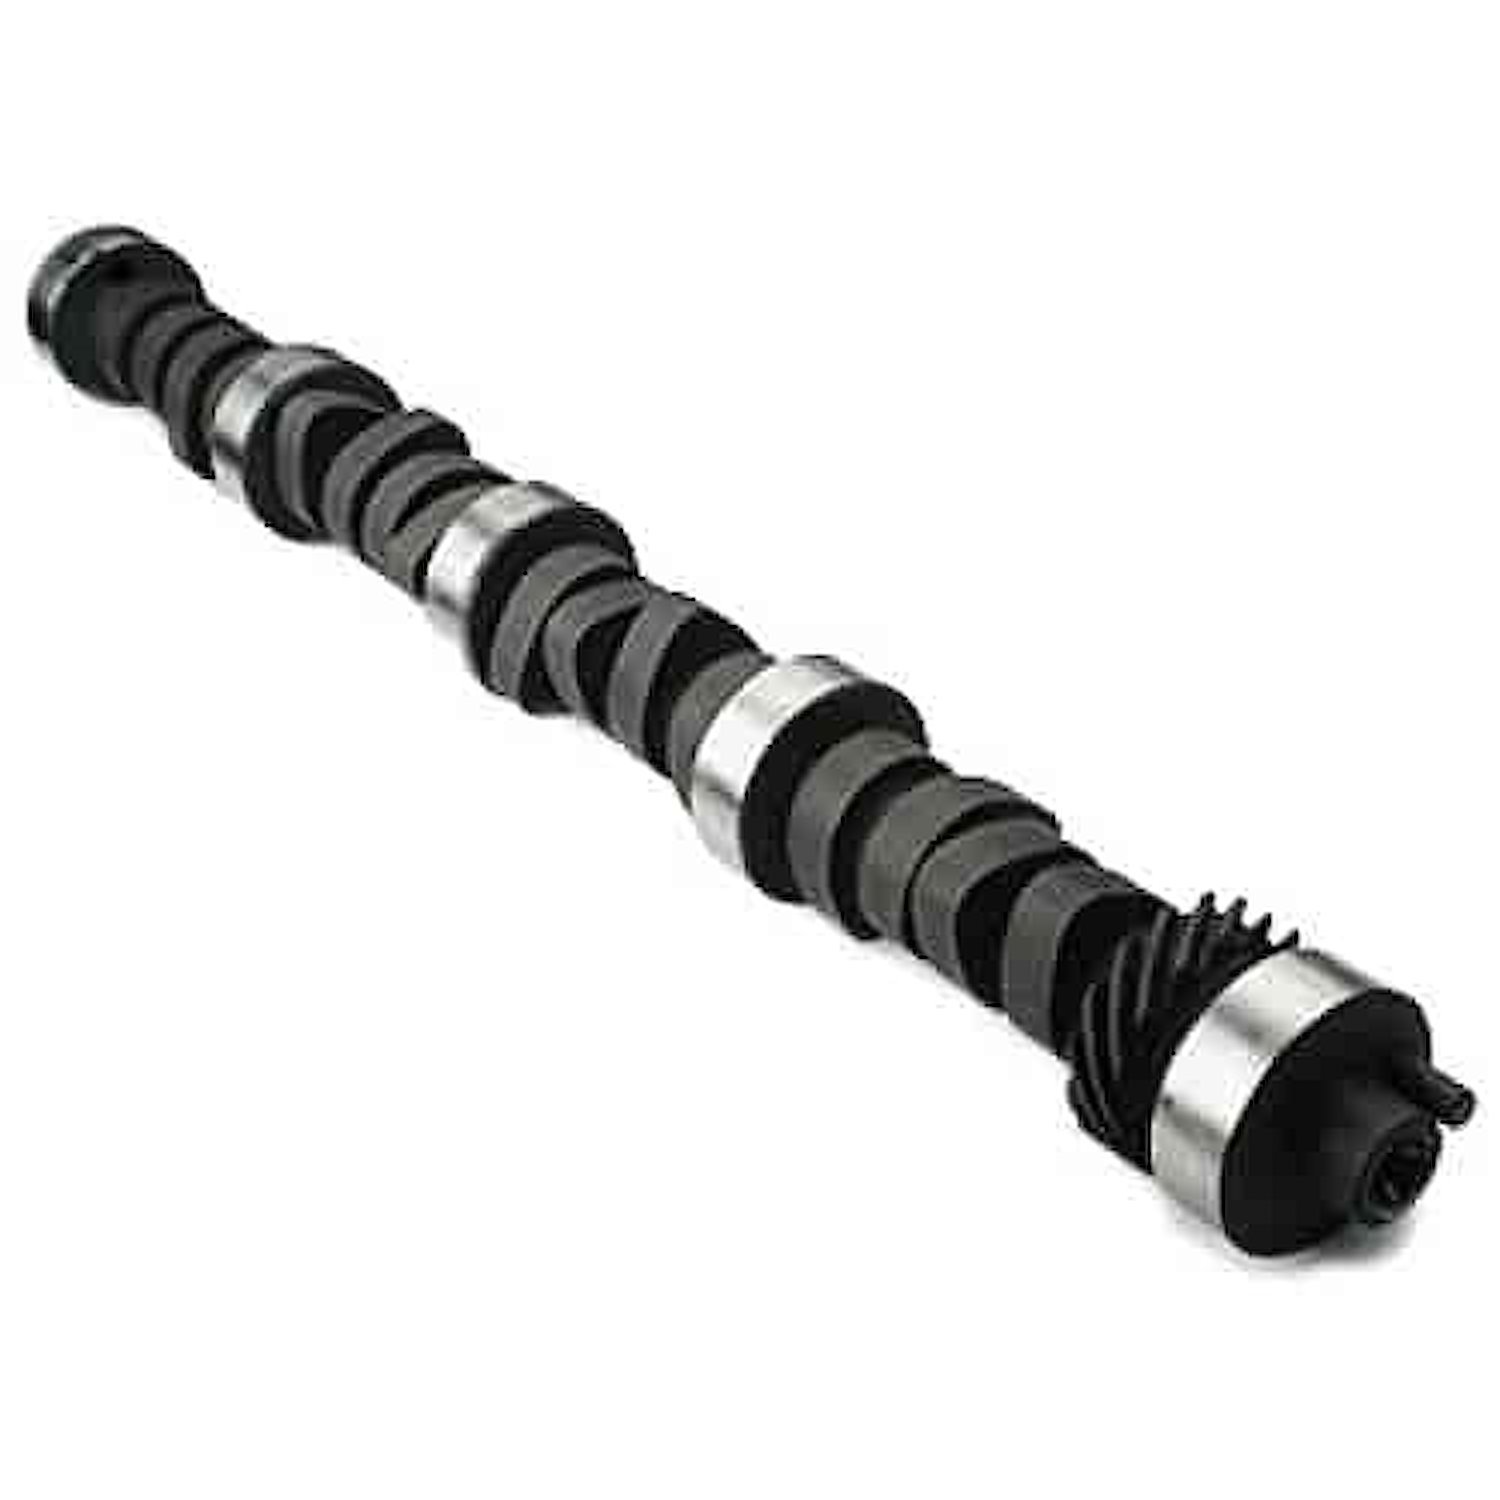 Monarch Flat Tappet Camshaft for Ford 351C, 351M,